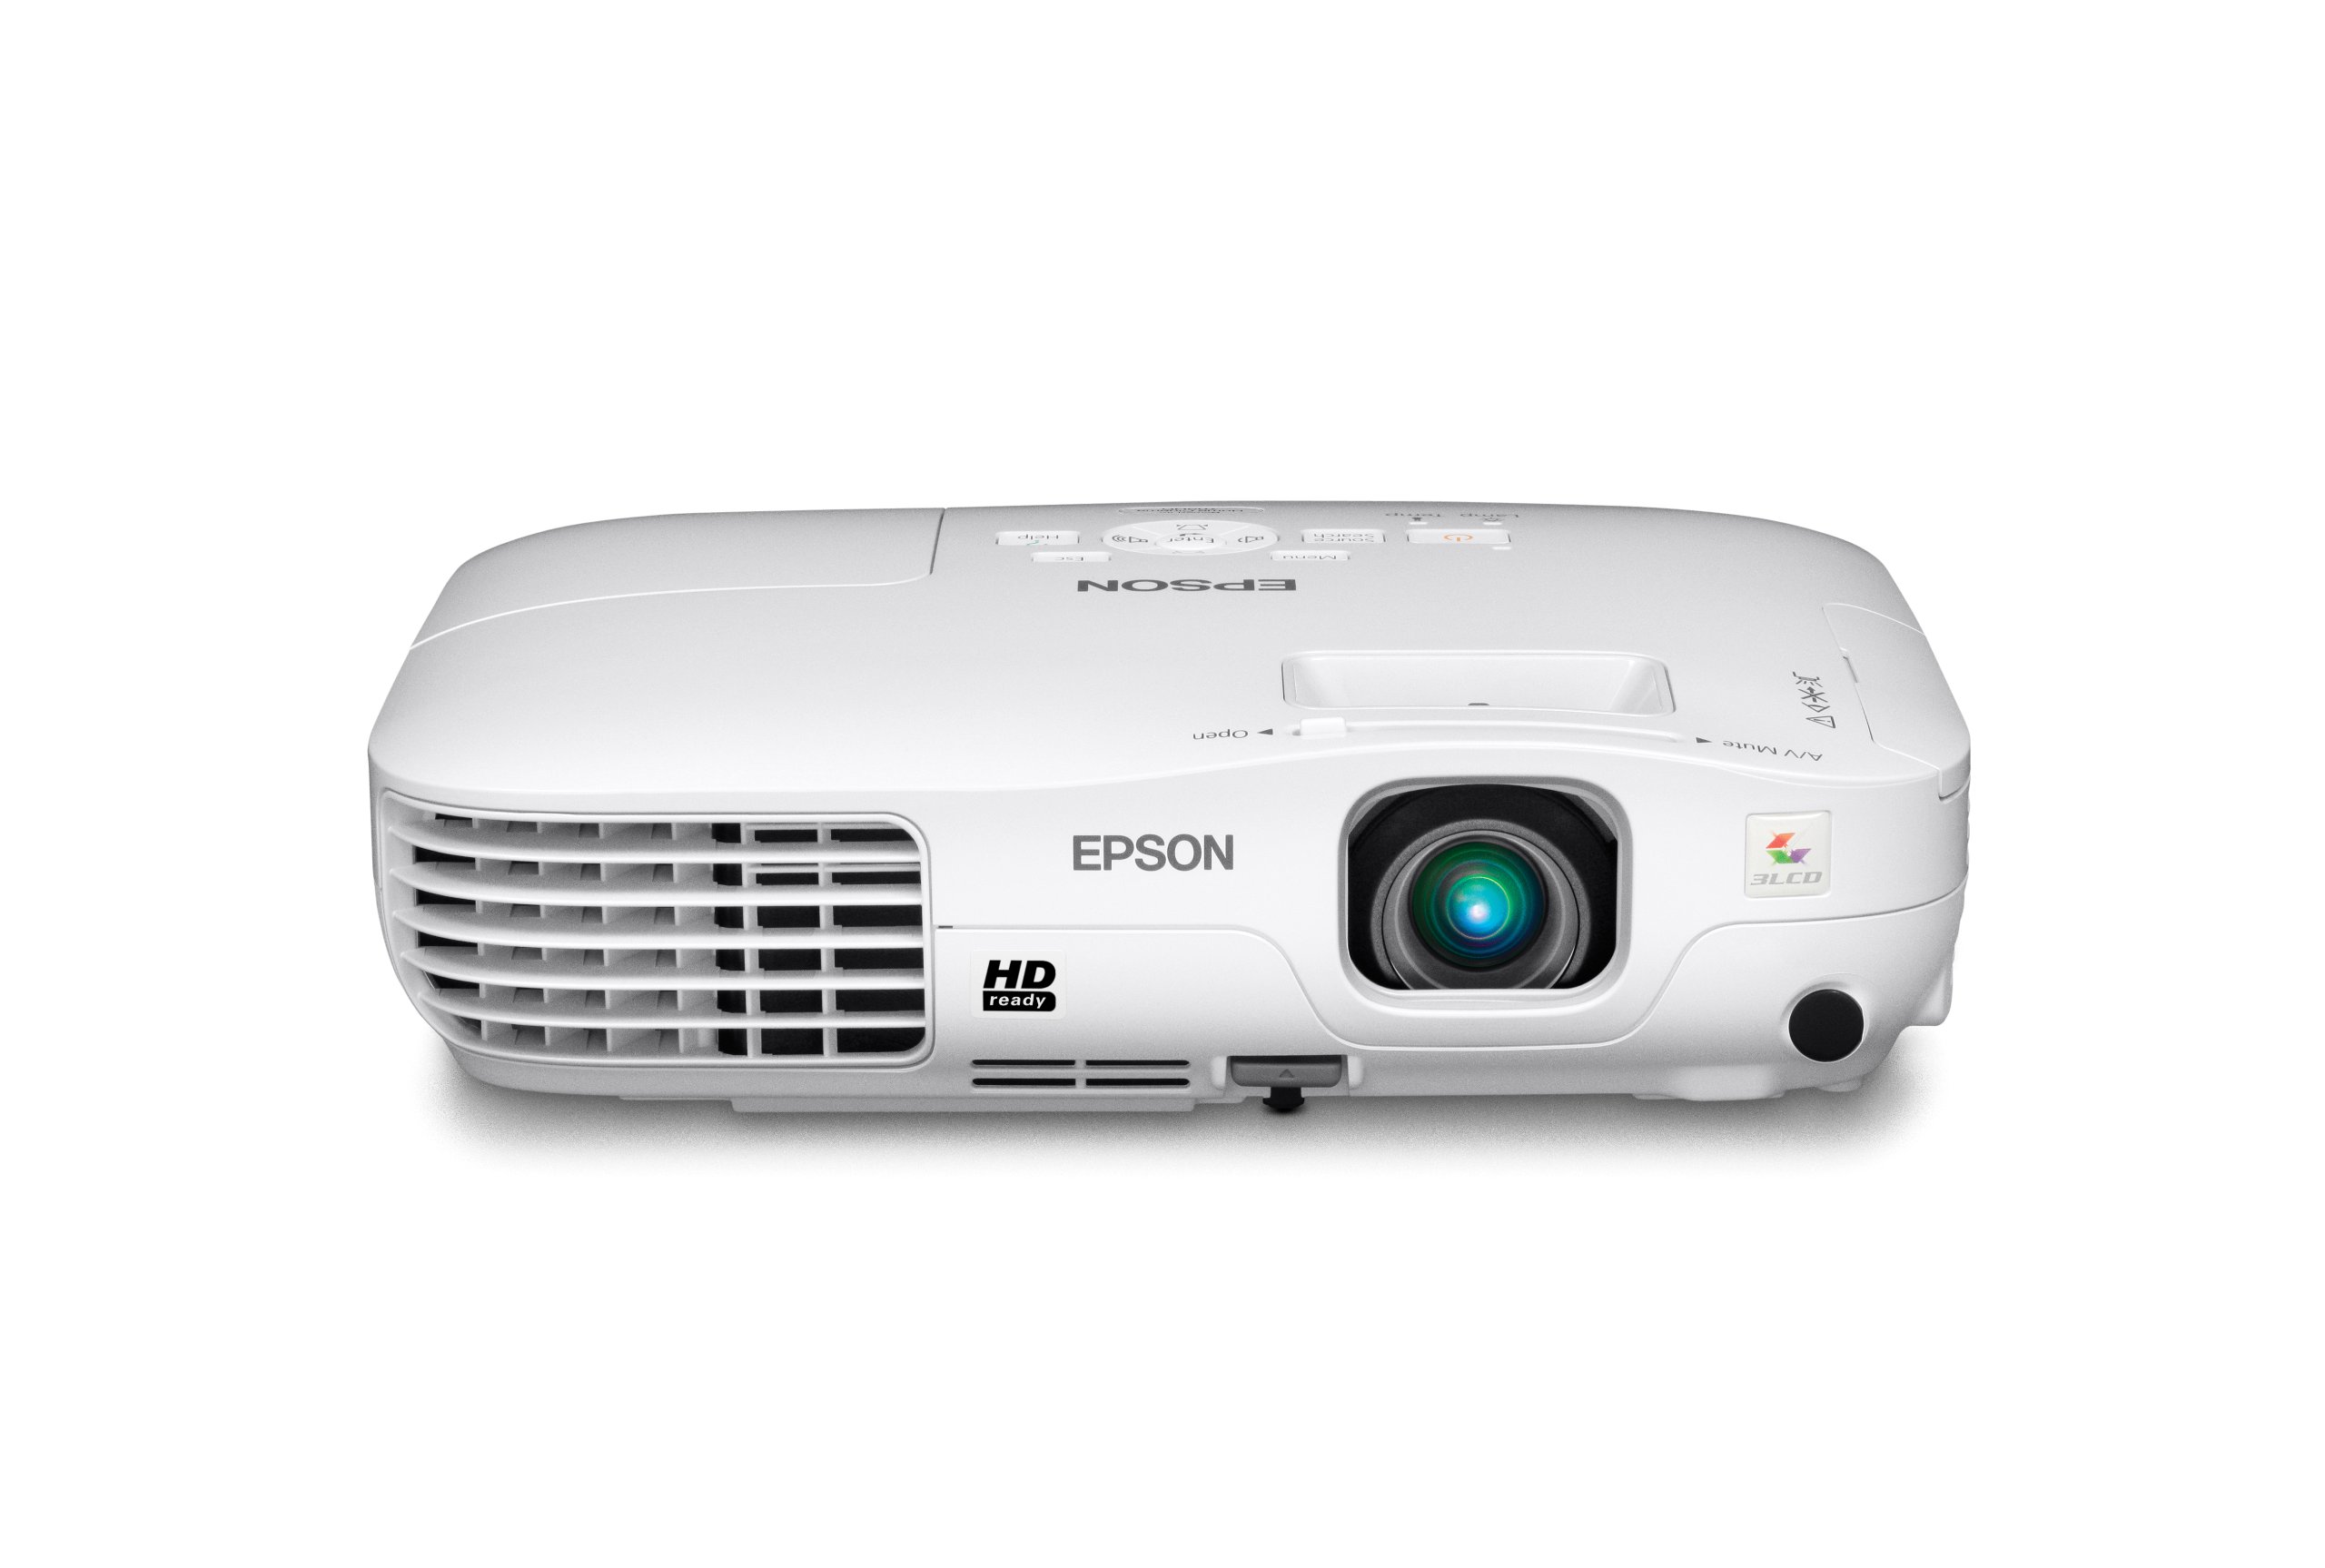 How To Connect Iphone To Epson Projector